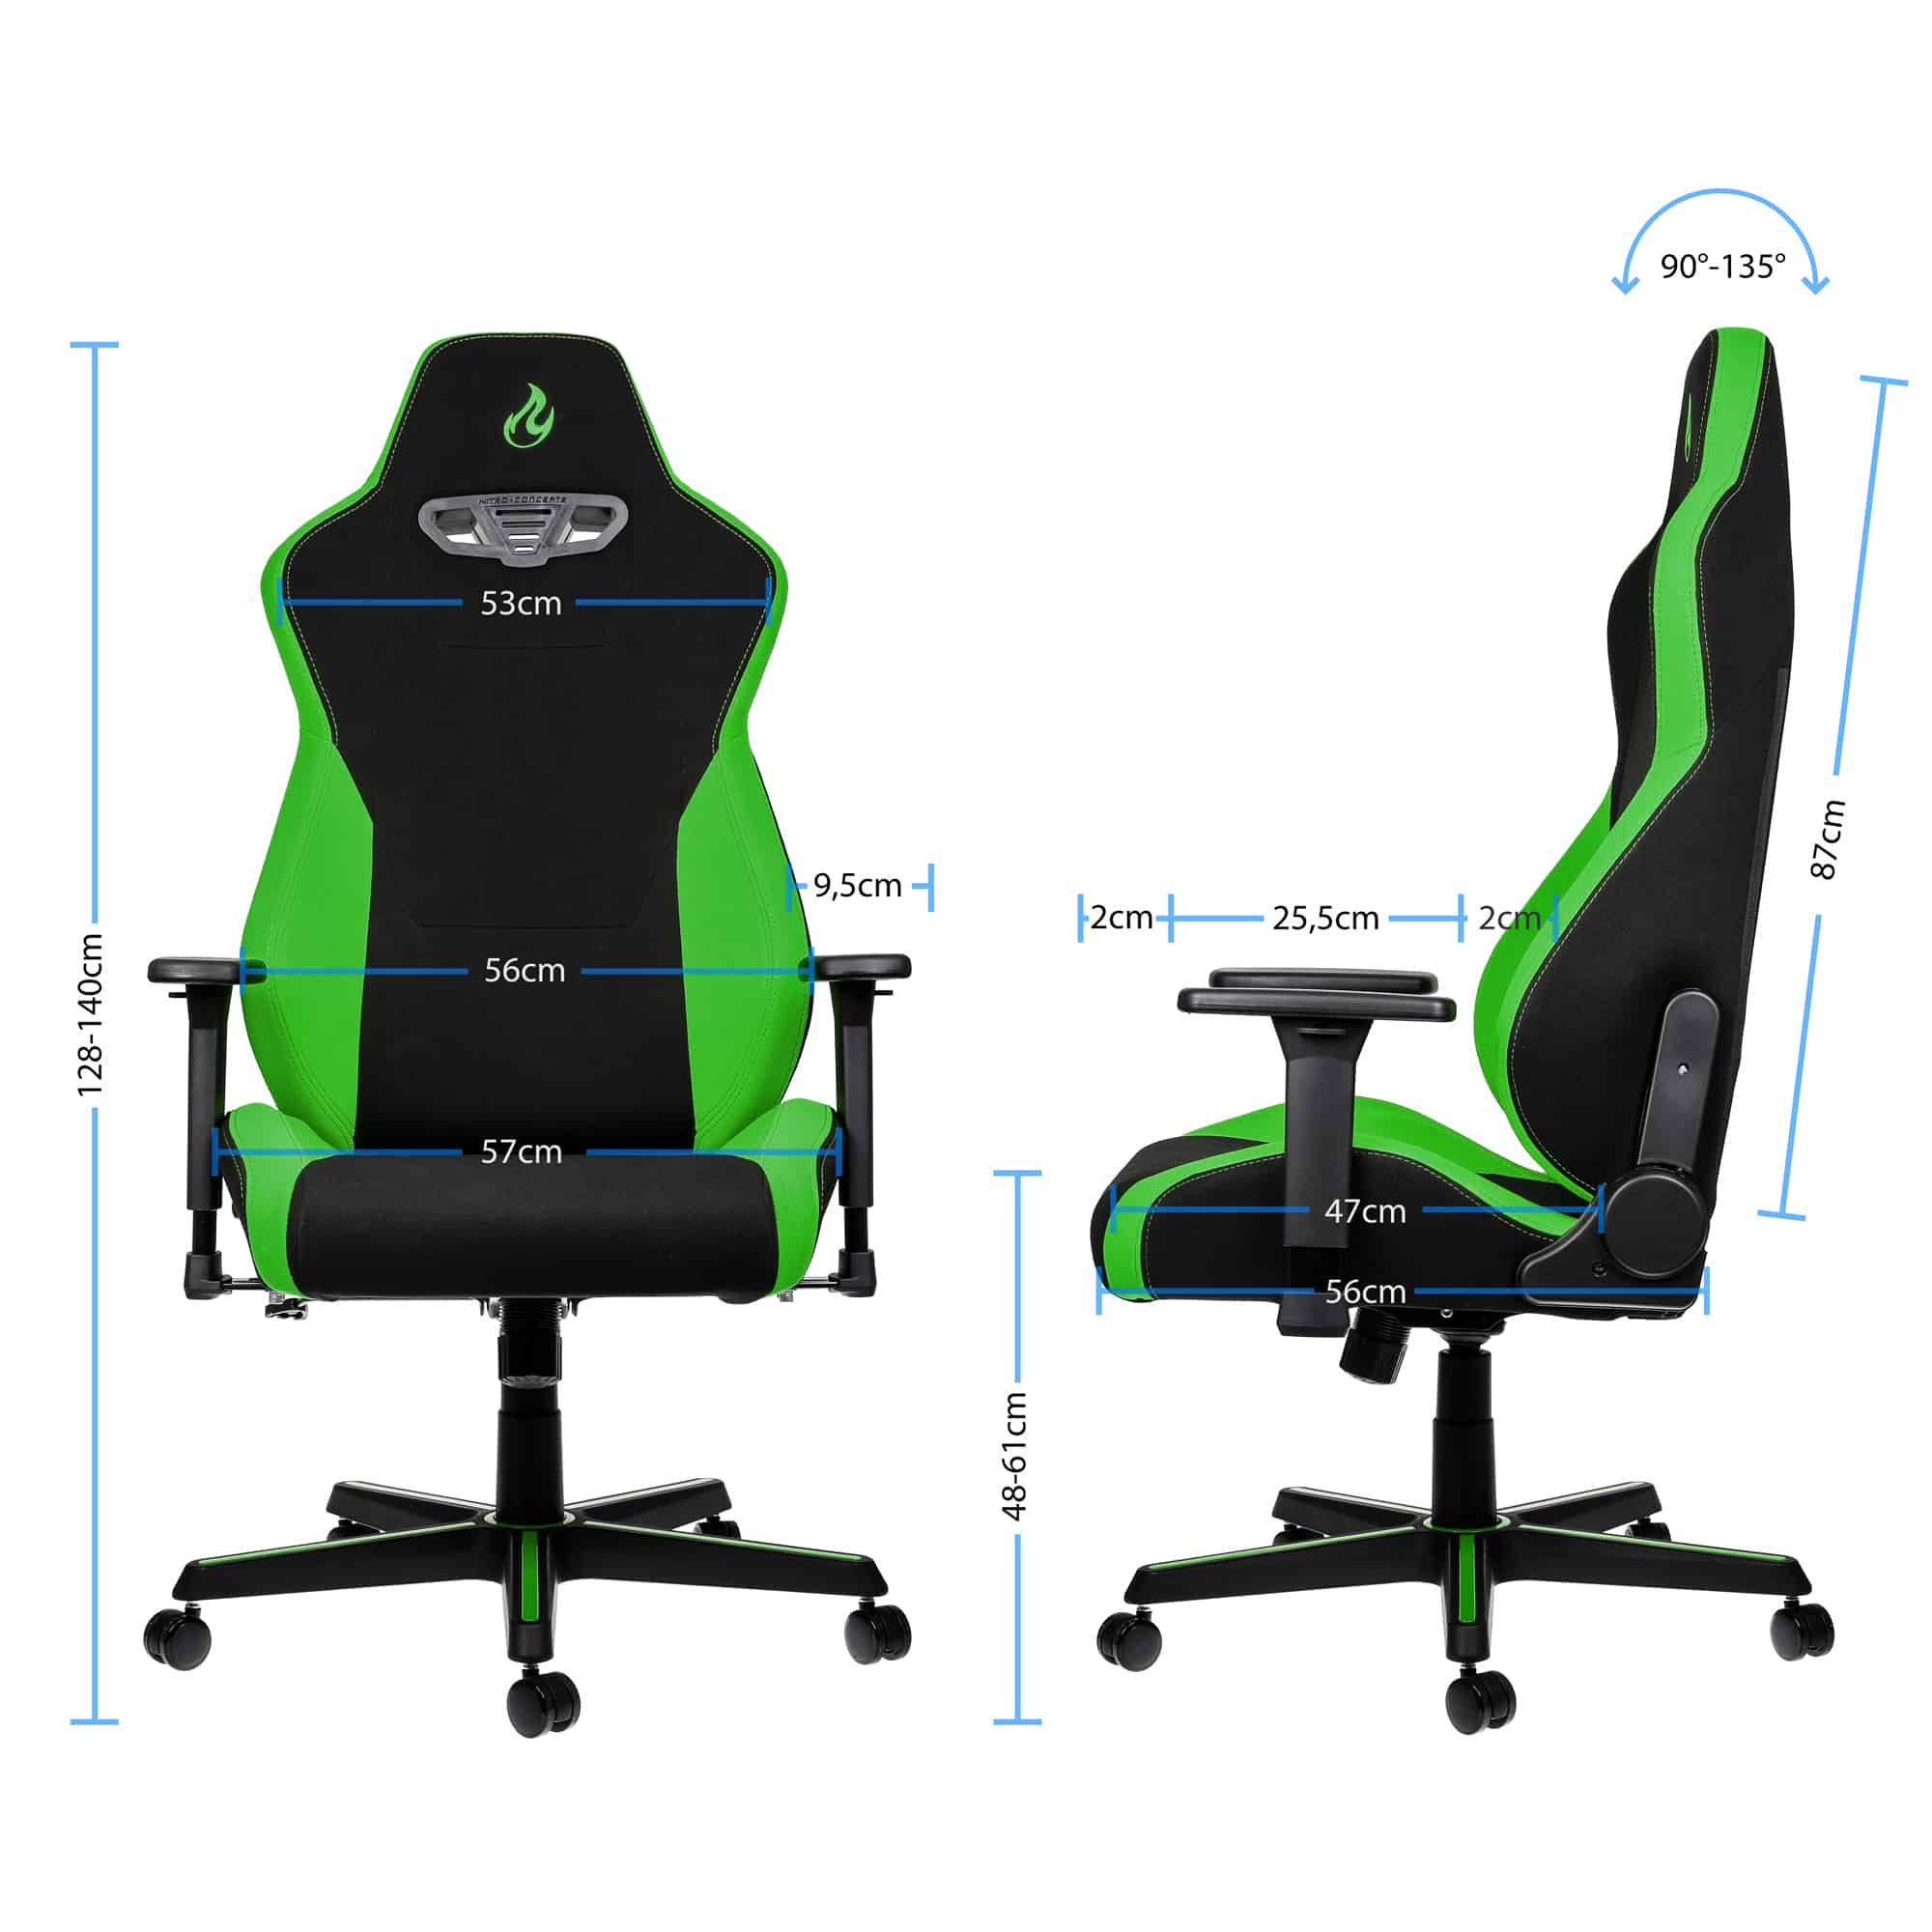 Nitro Concepts S300 Series Gaming Chair Black/Green